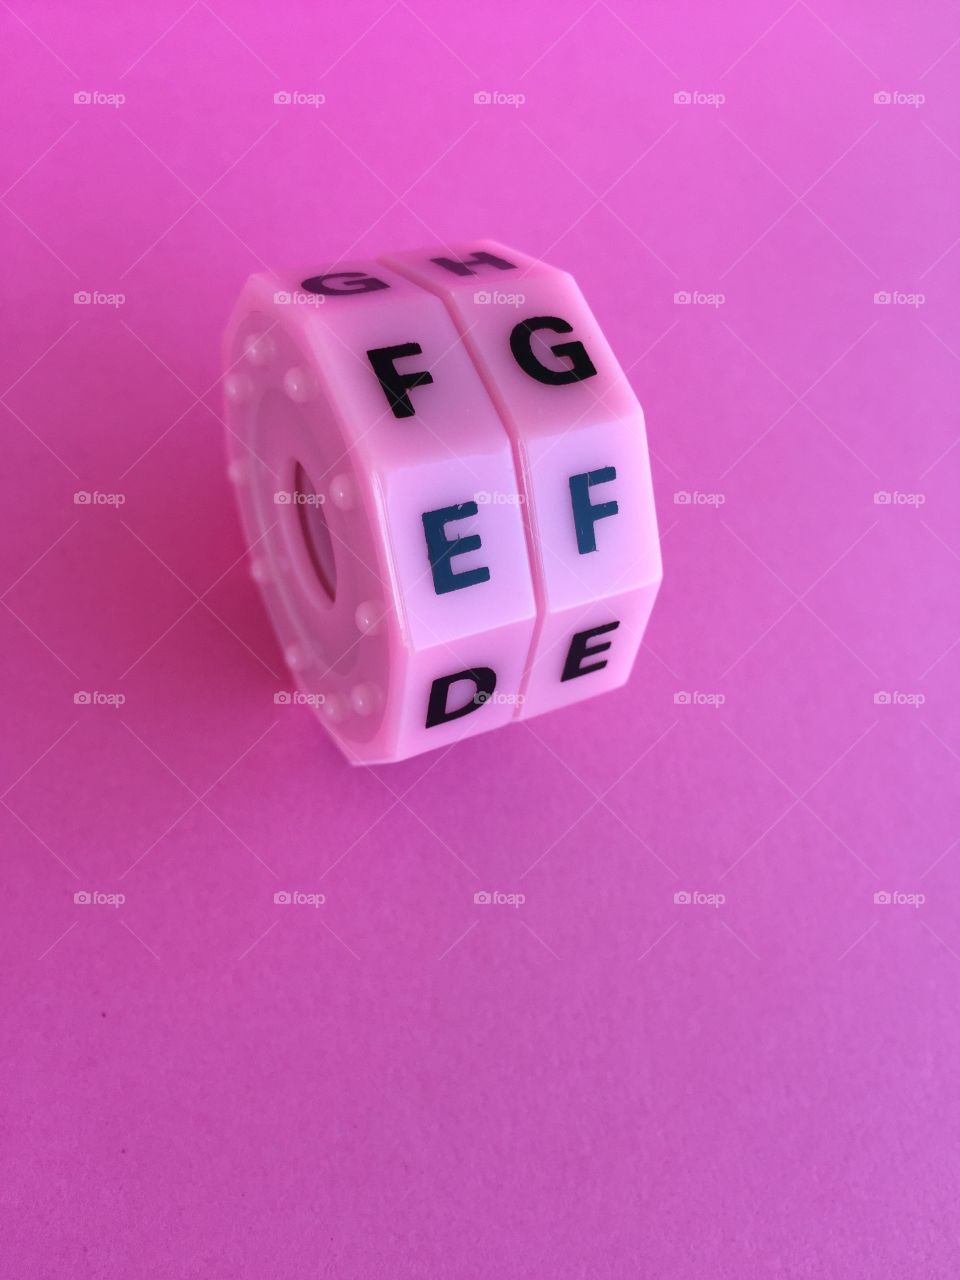 Puzzle against pink background